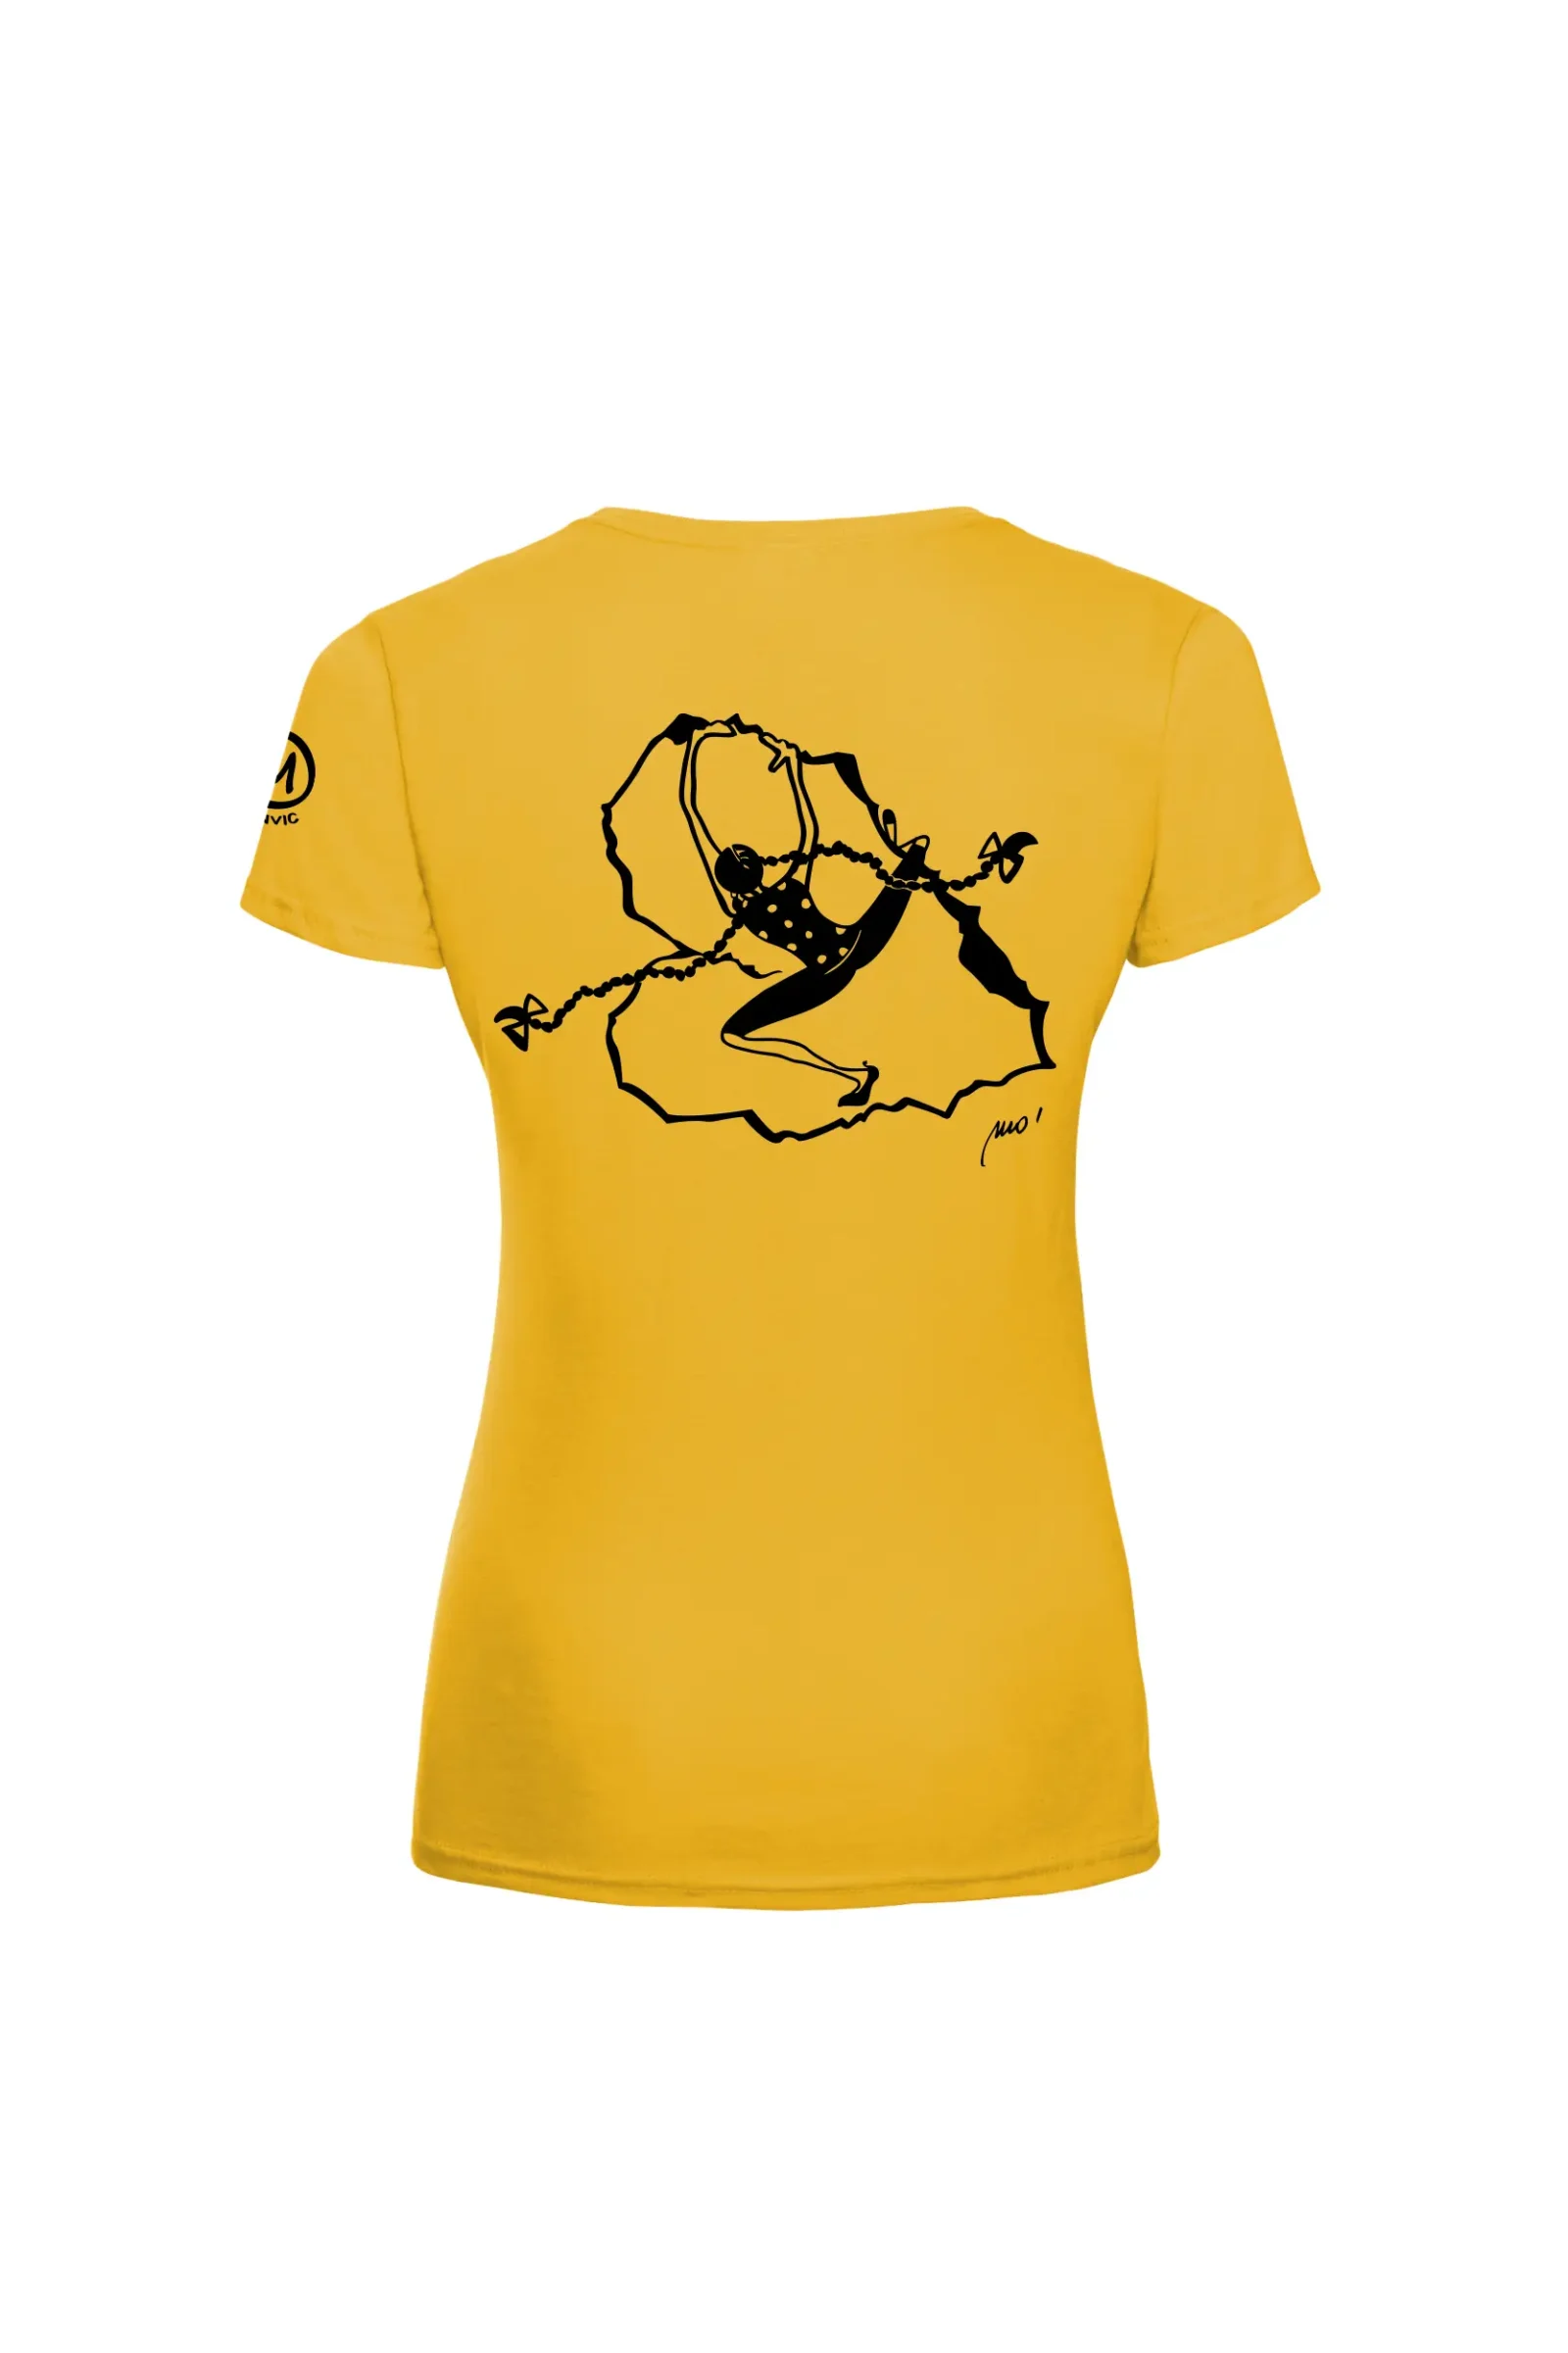 T-shirt escalade femme - coton jaune - graphisme "Heart of the Rock" - SHARON by MONVIC